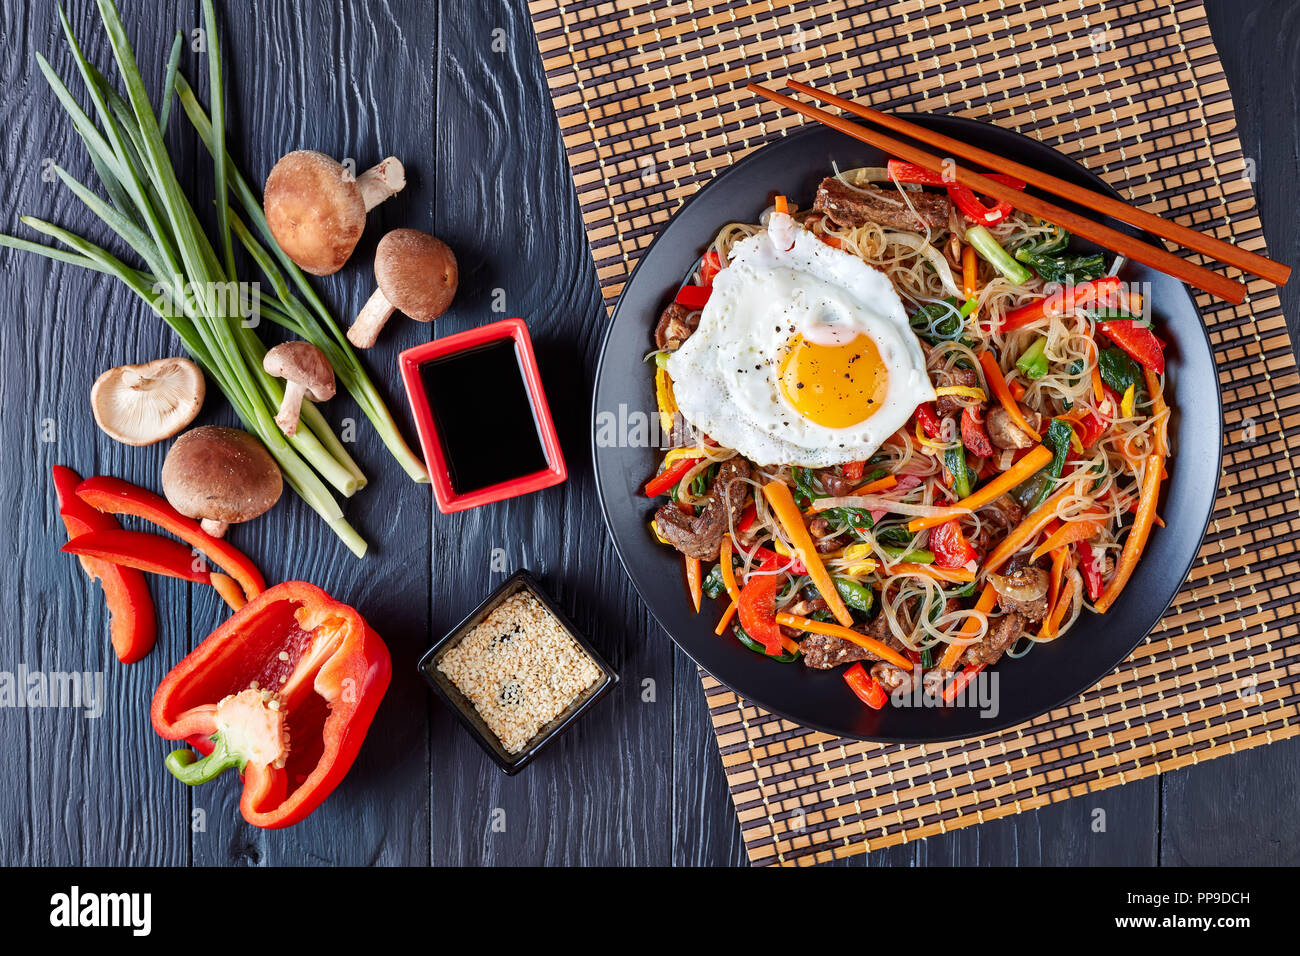 Japchae glass noodles with vegetables: spinach, red bell pepper, onion, carrot, garlic, shiitake mushrooms and beef, dressed with mix of sesame seeds  Stock Photo